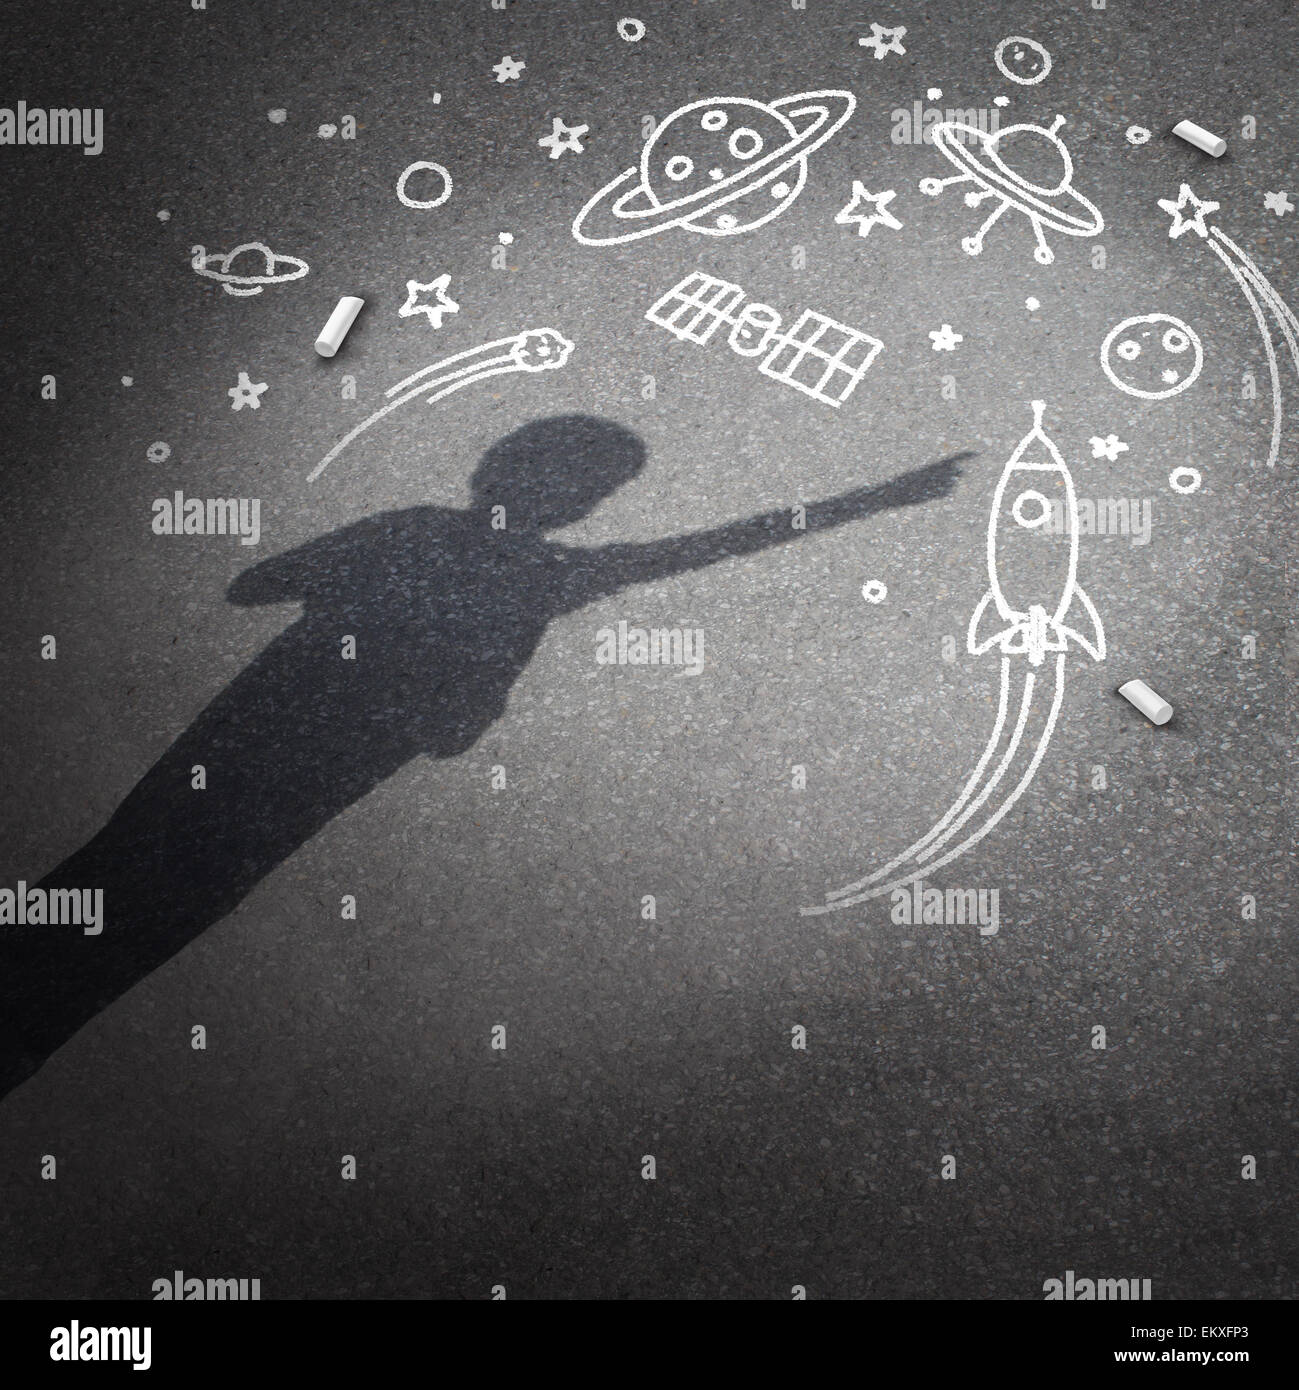 Child space dream as a childhood imagination concept with a cast shadow of a kid dreaming of being an astronaut or astronomy explorer with chalk drawings of a rocket spacecraft planets stars and a flying saucer. Stock Photo